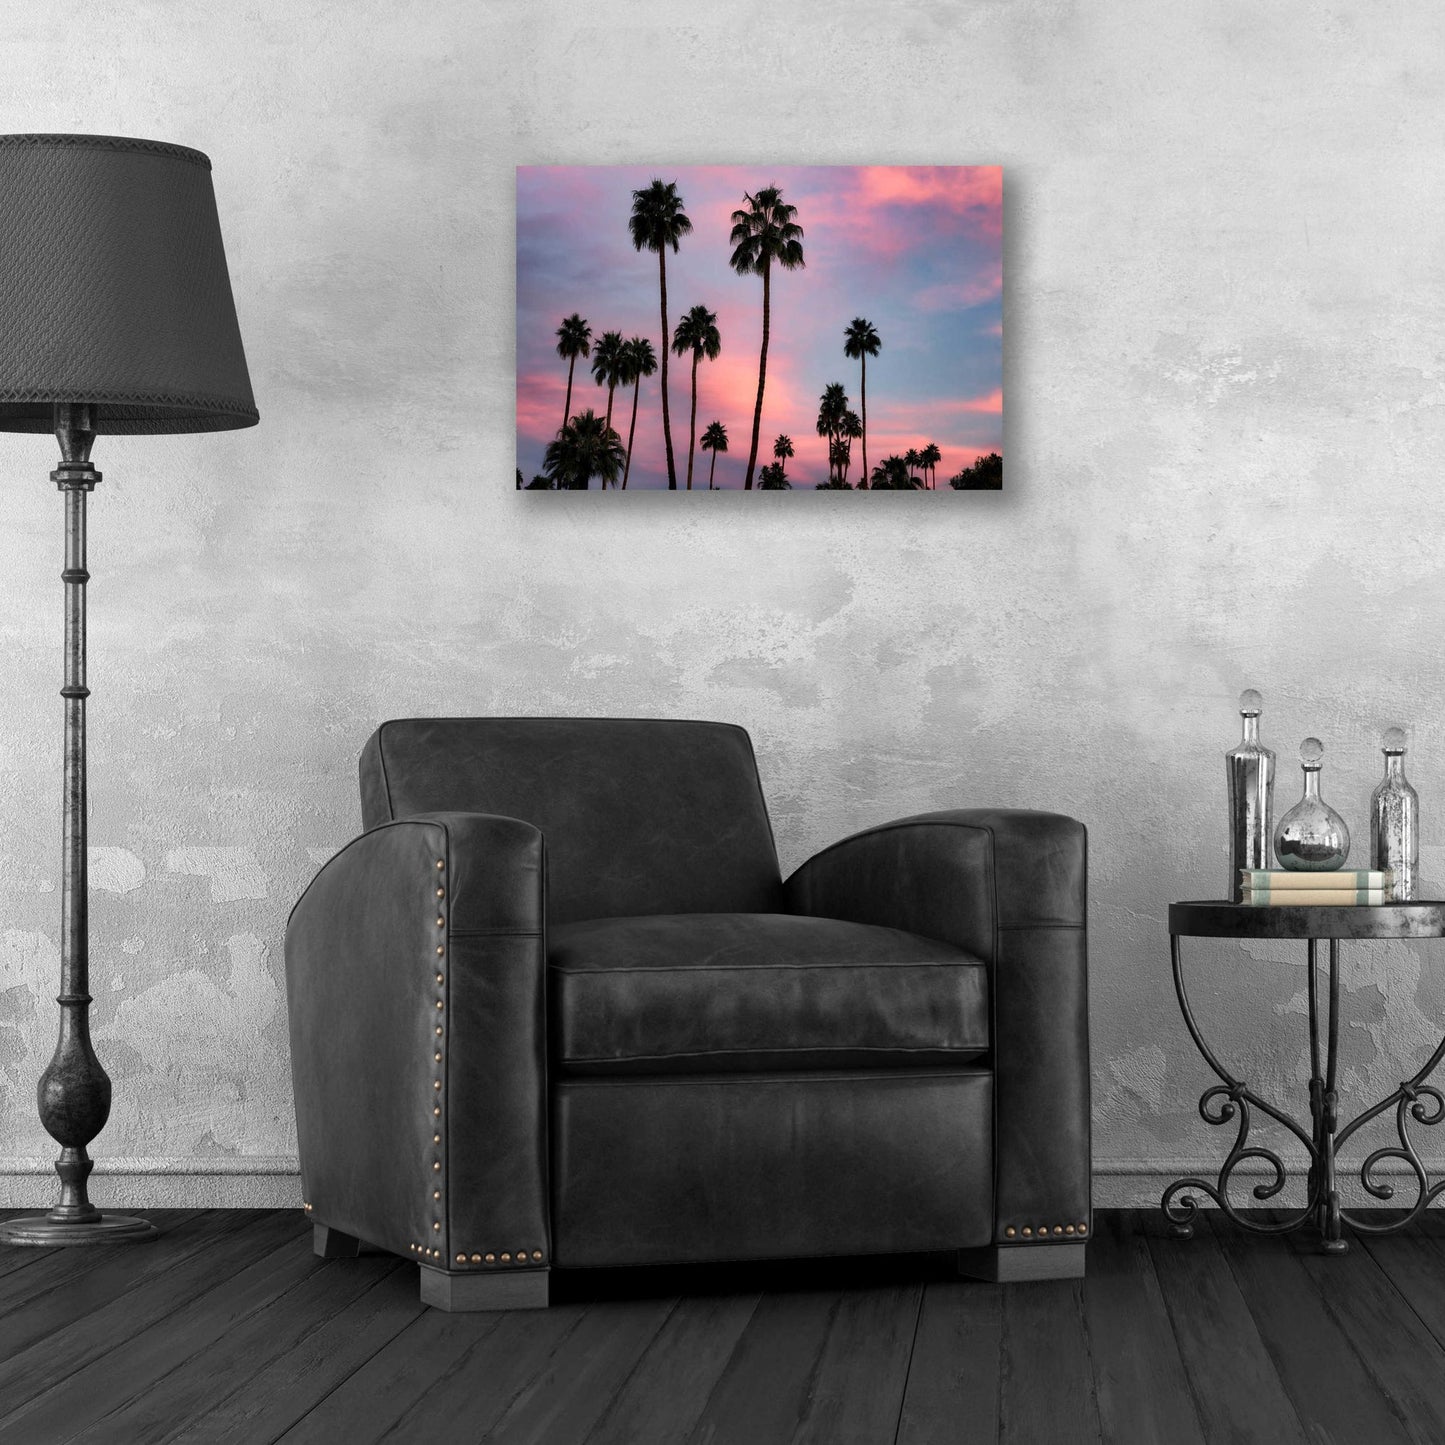 Epic Art 'Palm Sunset' by Dennis Frates, Acrylic Glass Wall Art,24x16